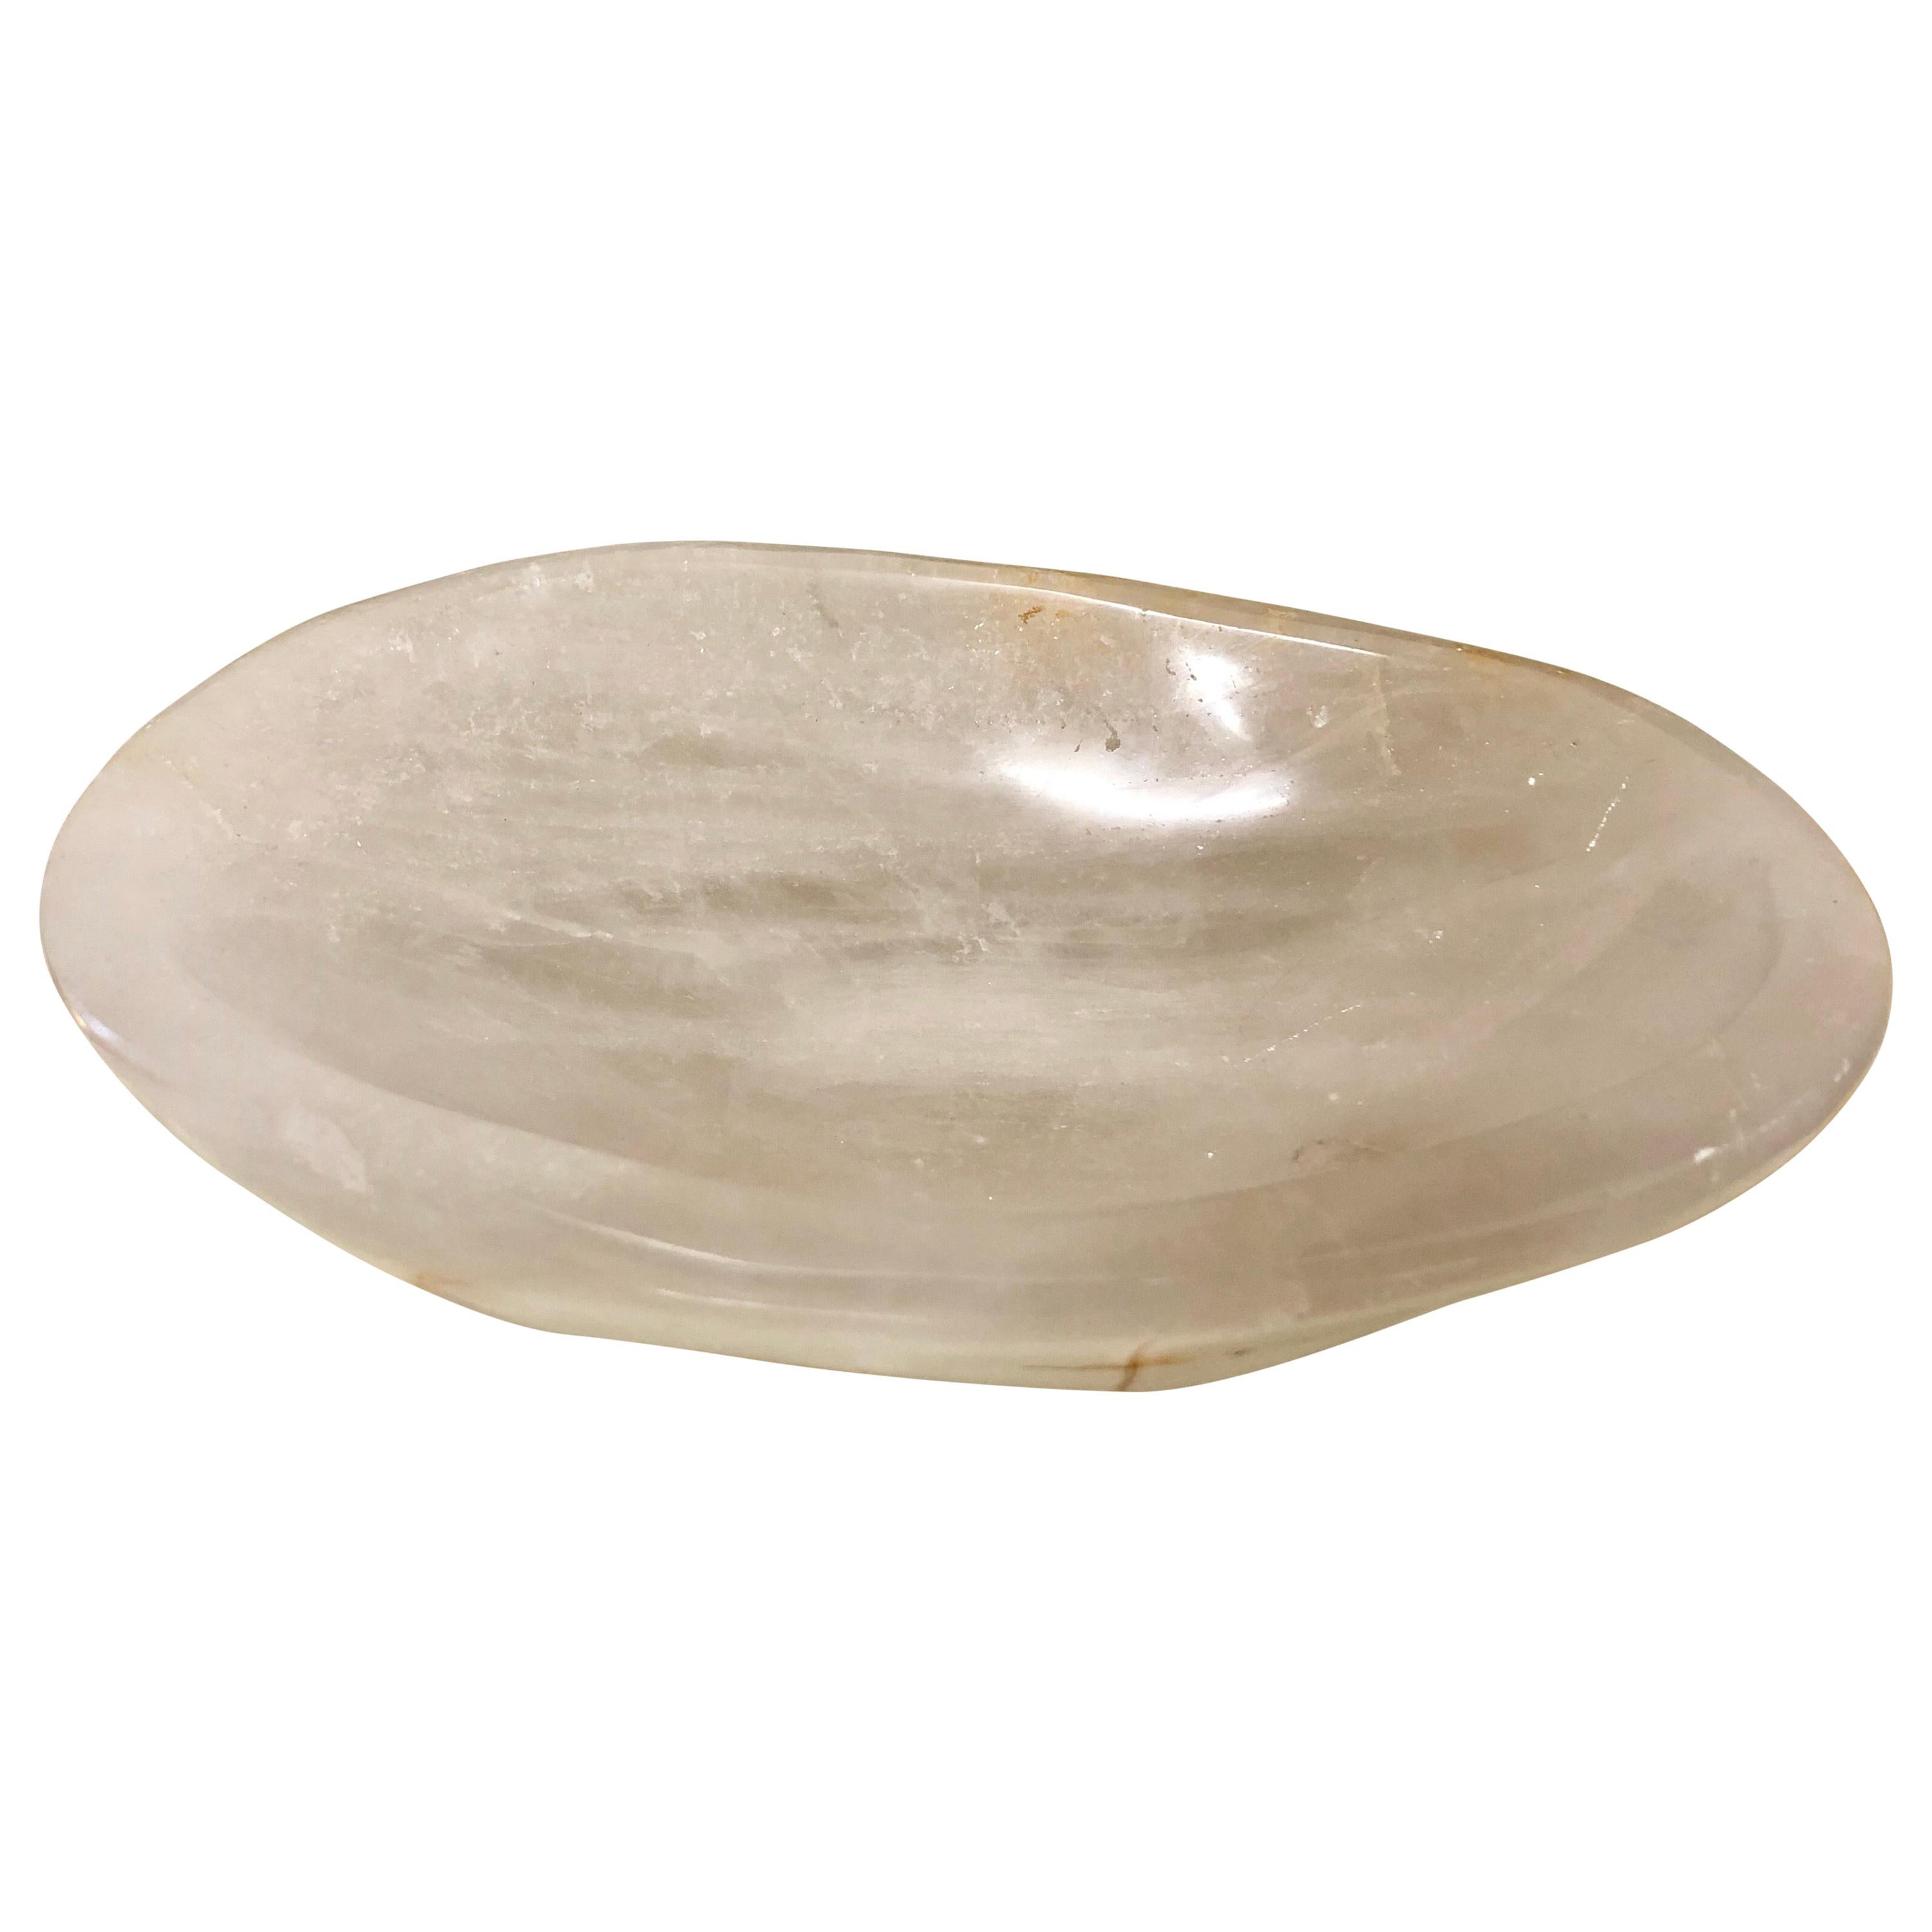 Rock Crystal Bowl from Brazil